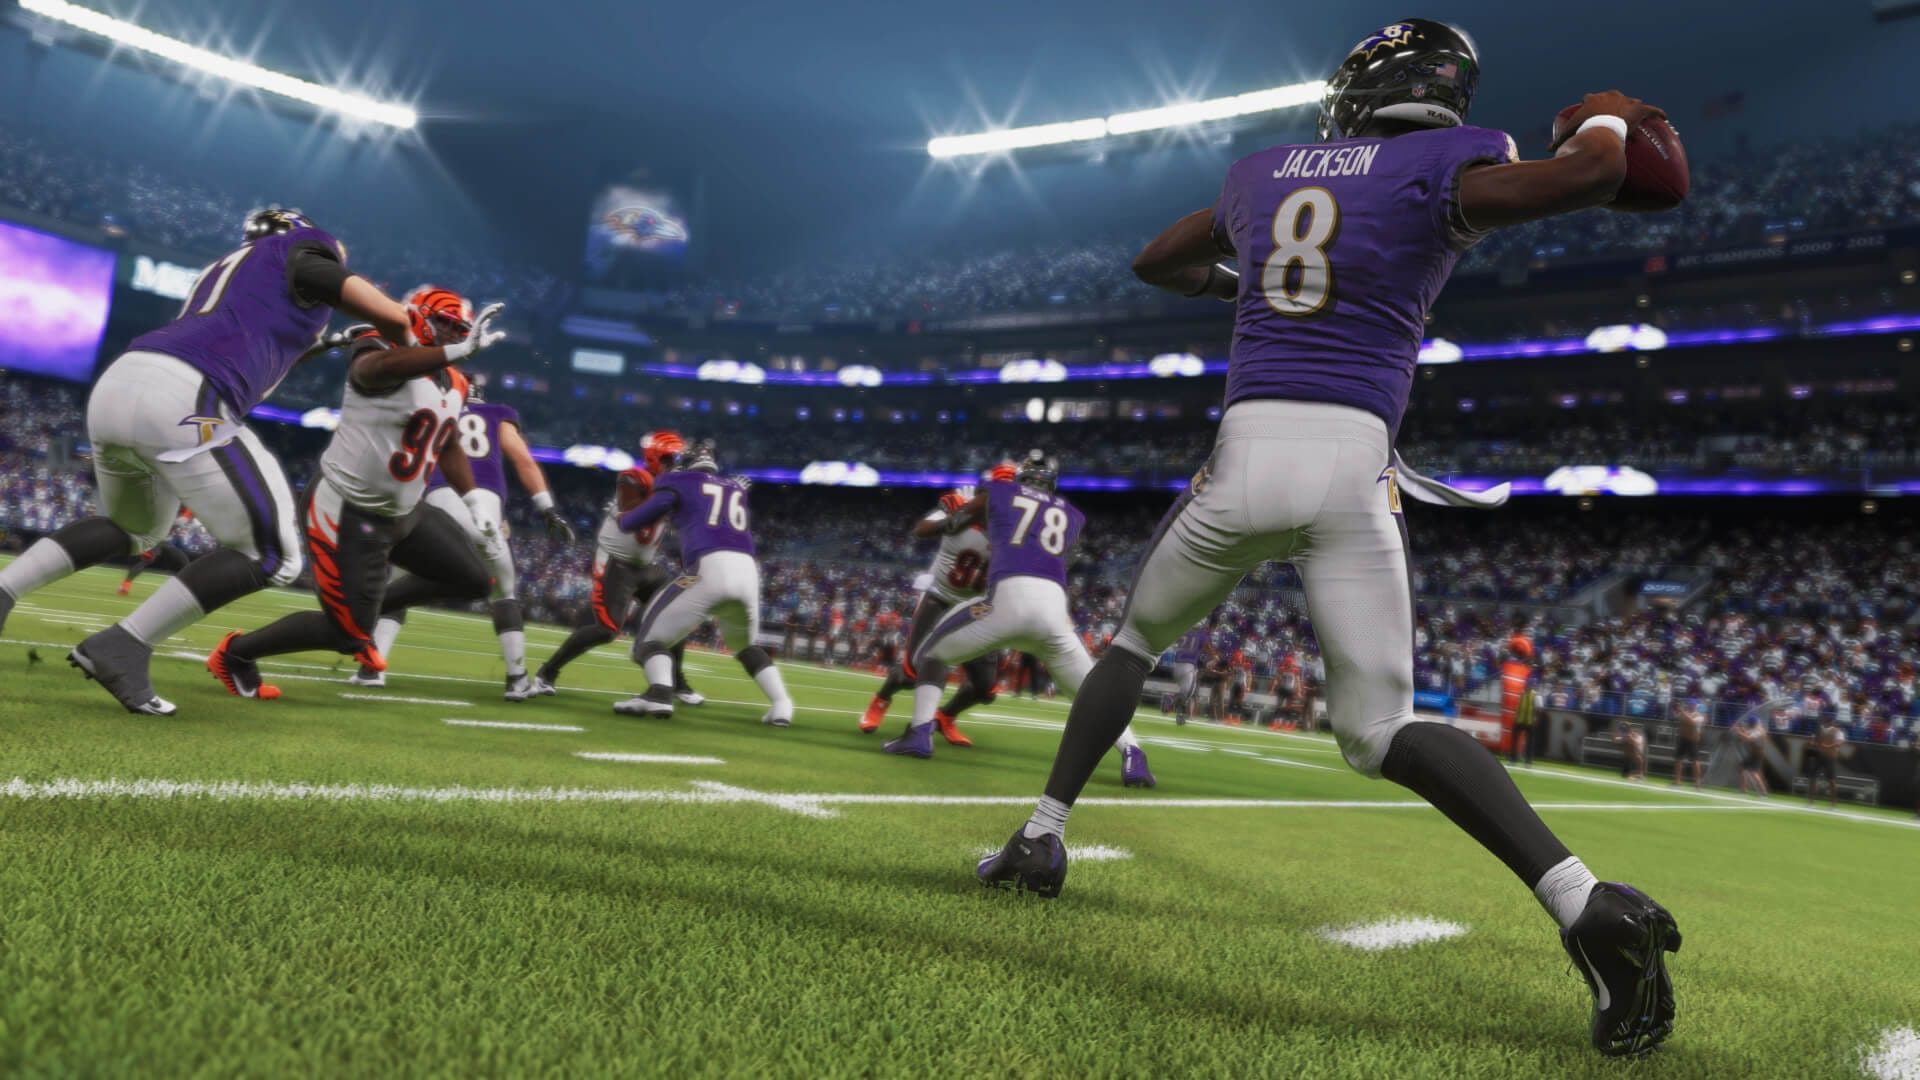 madden20nfl202120isi-5104676